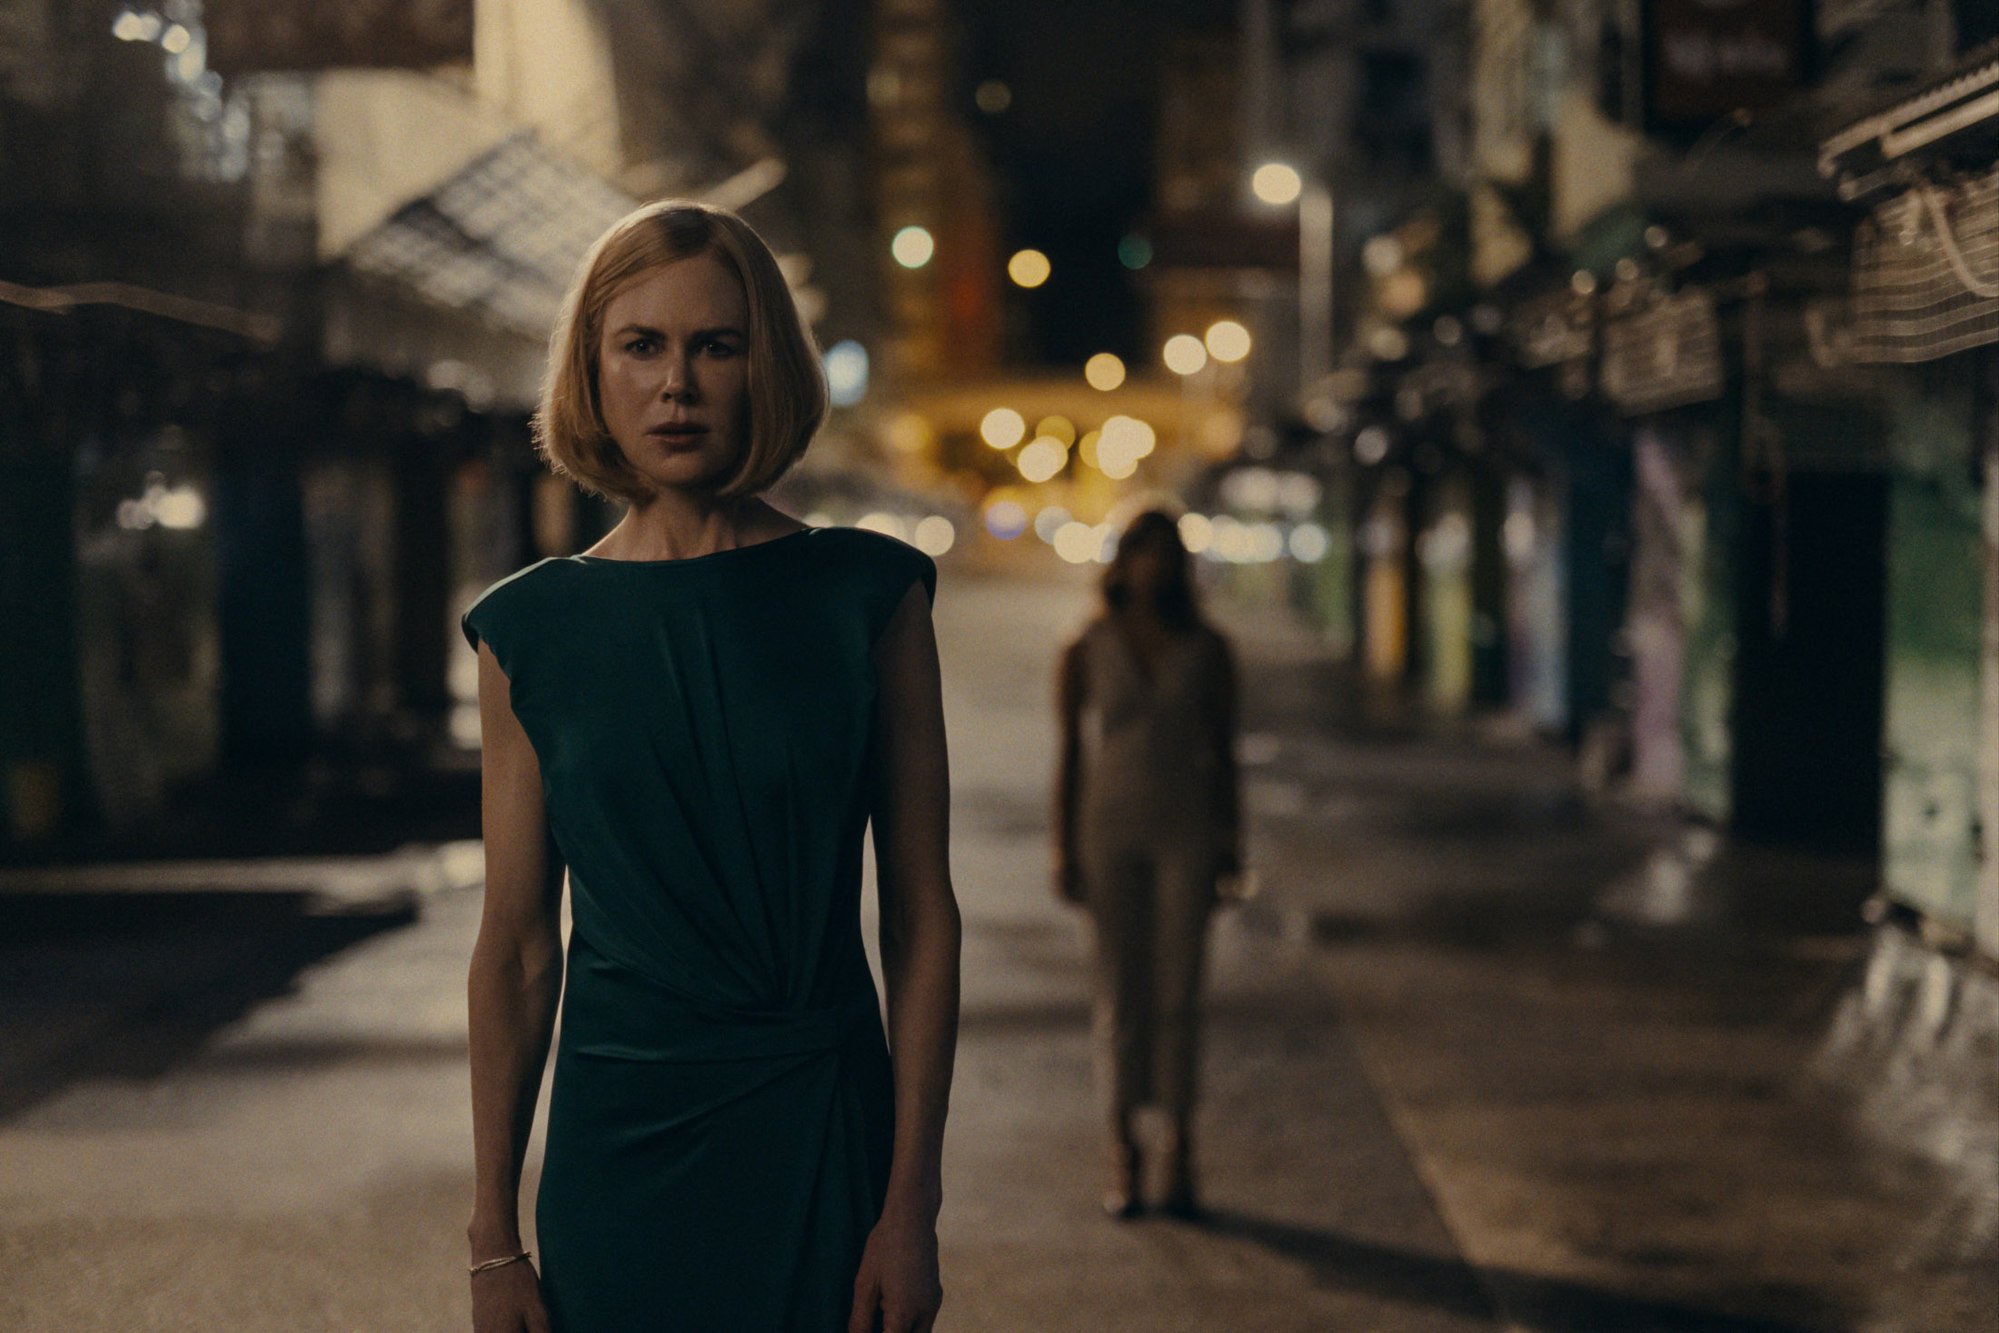 Nicole Kidman in Expats. The Film Services Office of Create Hong Kong set up by the government had provided outdoor filming assistance to the production in 2021. Photo: Prime Video